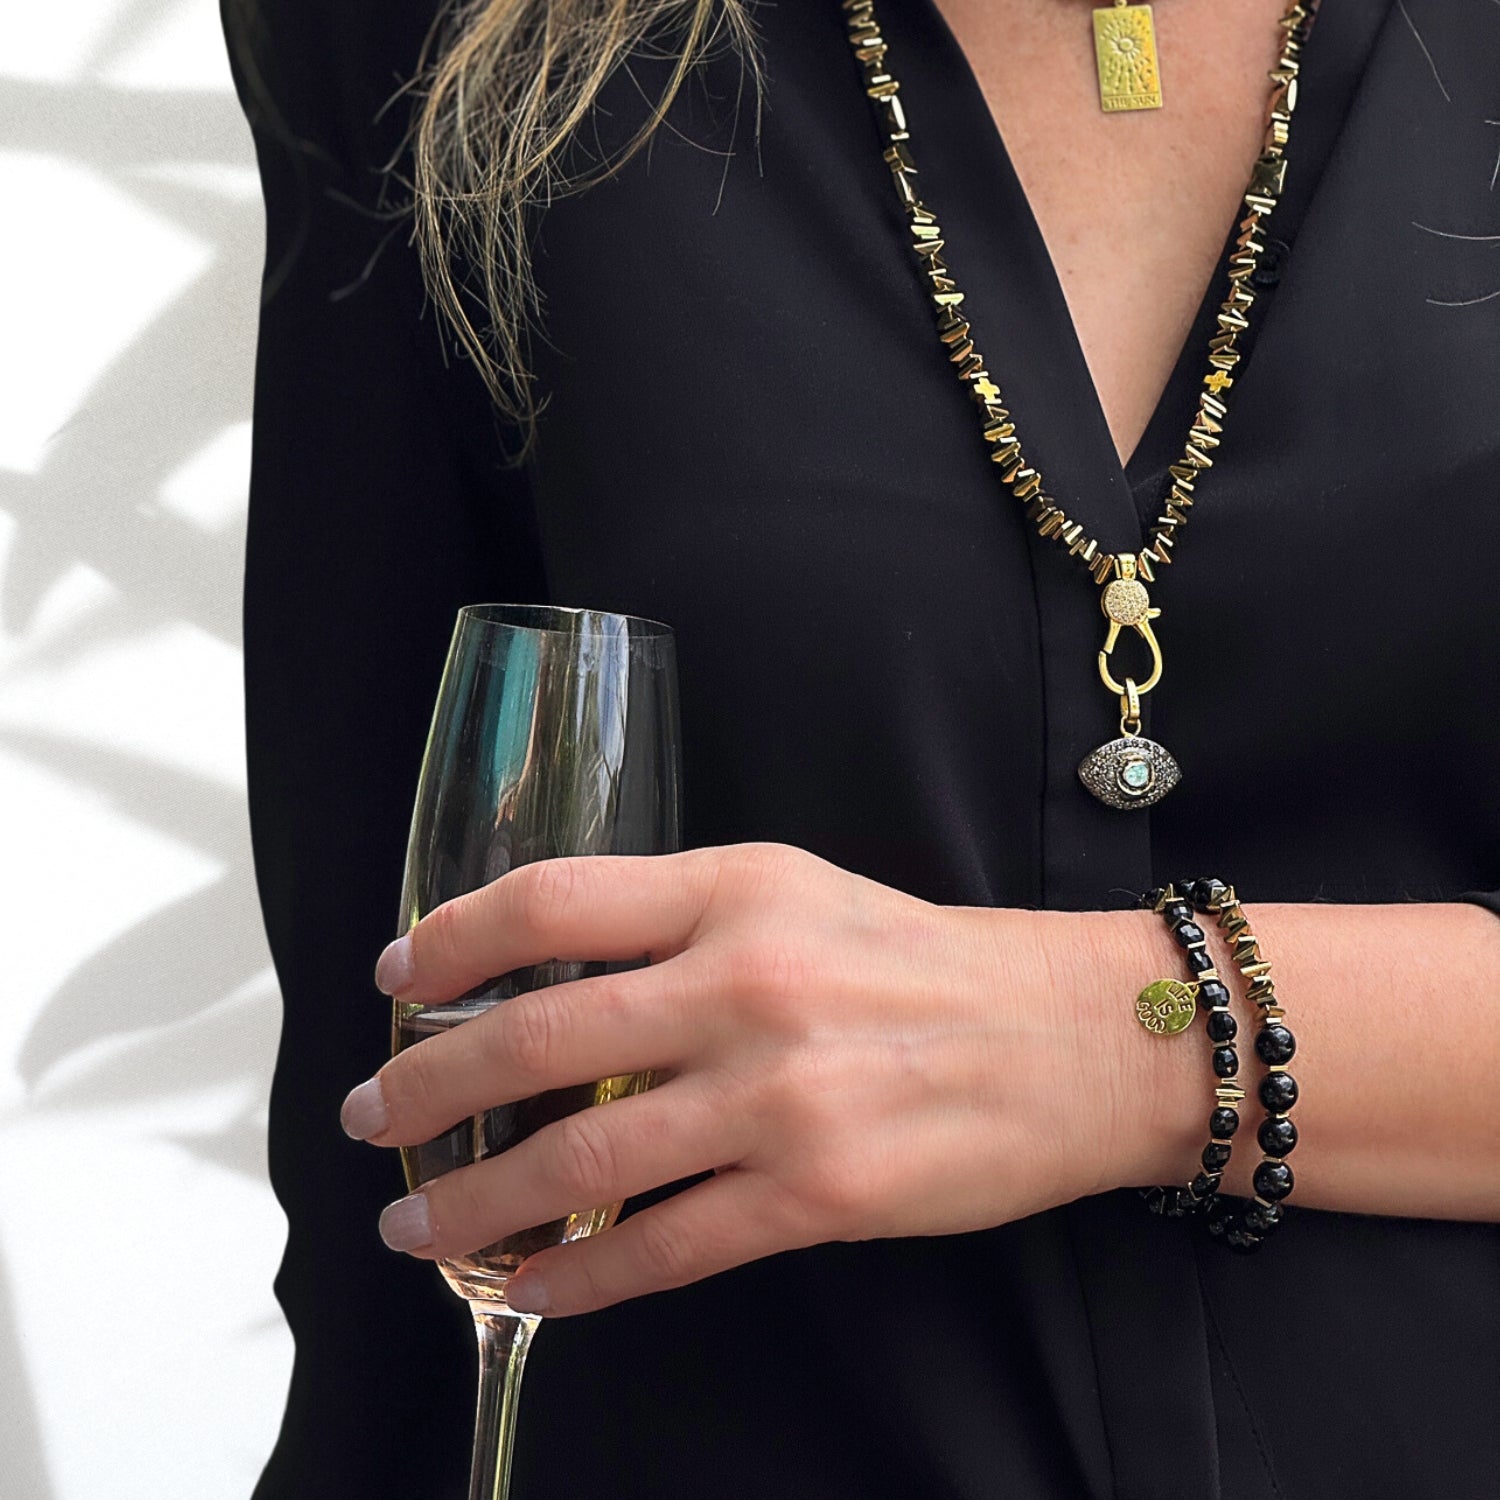 Elegance and Inspiration: Handcrafted Black Onyx Bracelet Set with Gold-Plated Charm